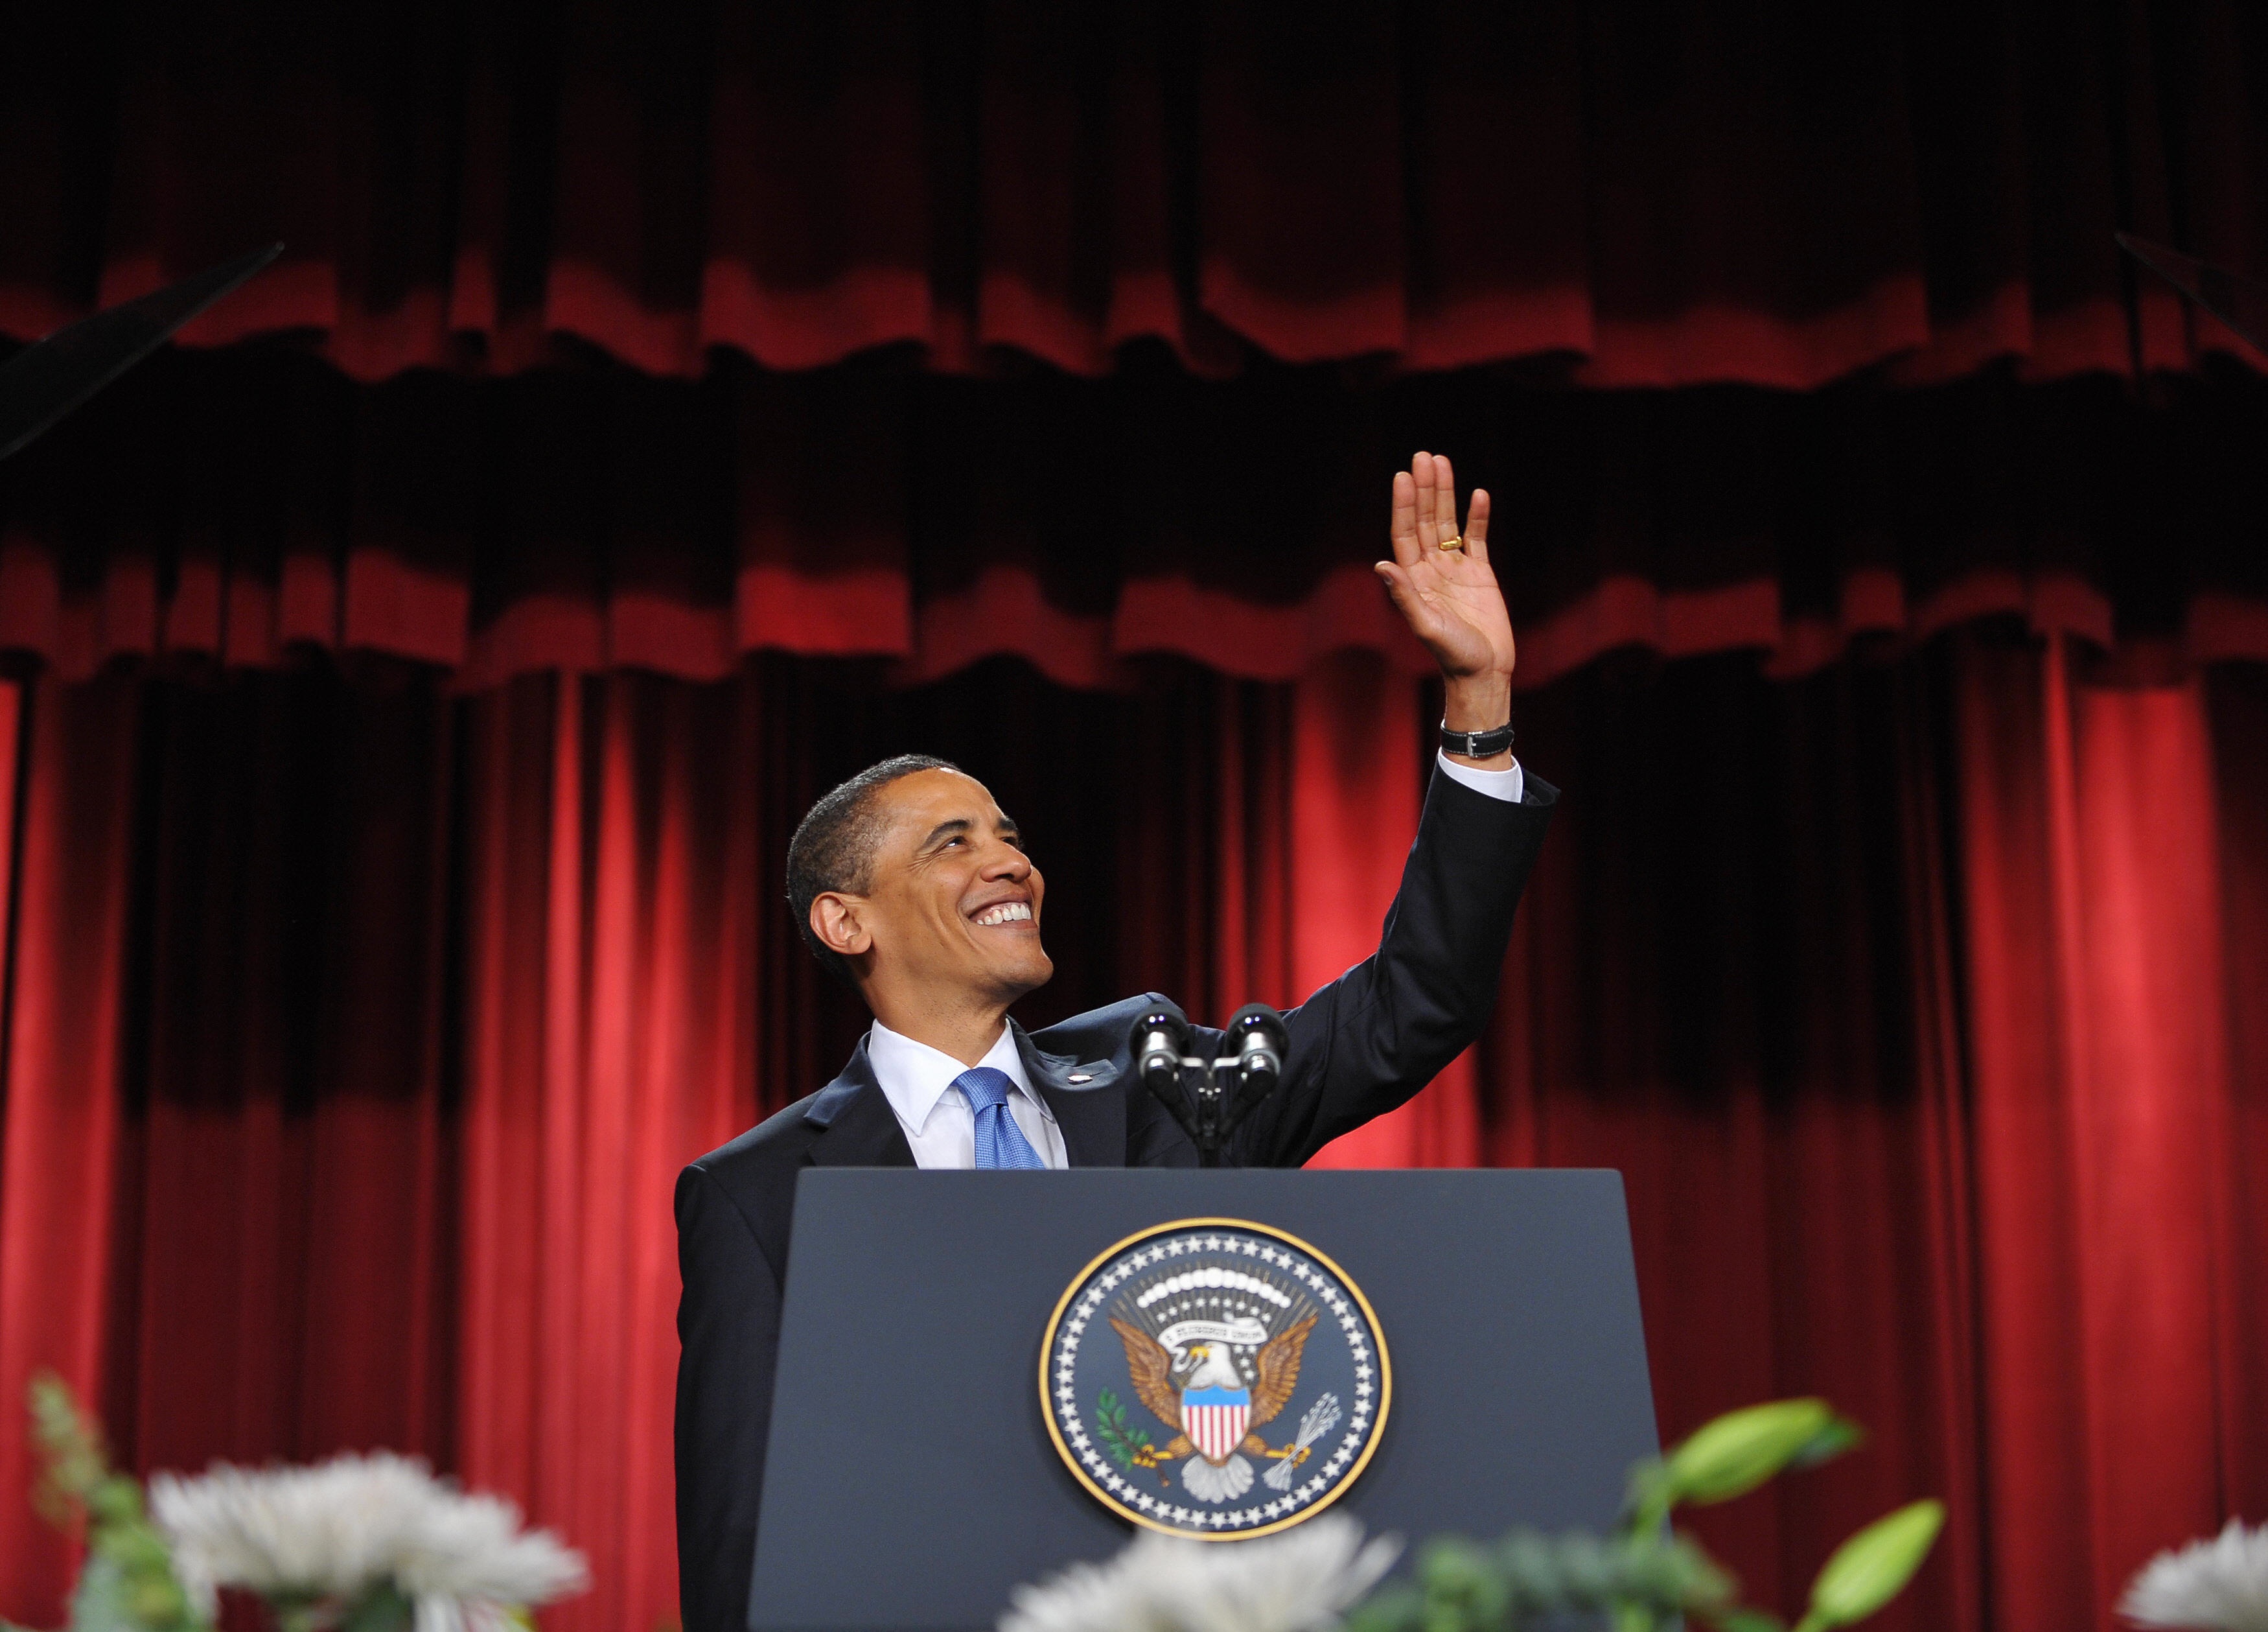 MANDEL NGAN/AFP/Getty Images. US President Barack Obama waves as he arrives onto the stage to deliver his highly-anticipated address to the Muslim world on June 4, 2009 in the Grand Hall of Cairo University in Cairo. Obama discussed Middle East peace with his Egyptian host ahead of a much-heralded address to the world's Muslims, seeking to heal a wide rift between America and Islam.